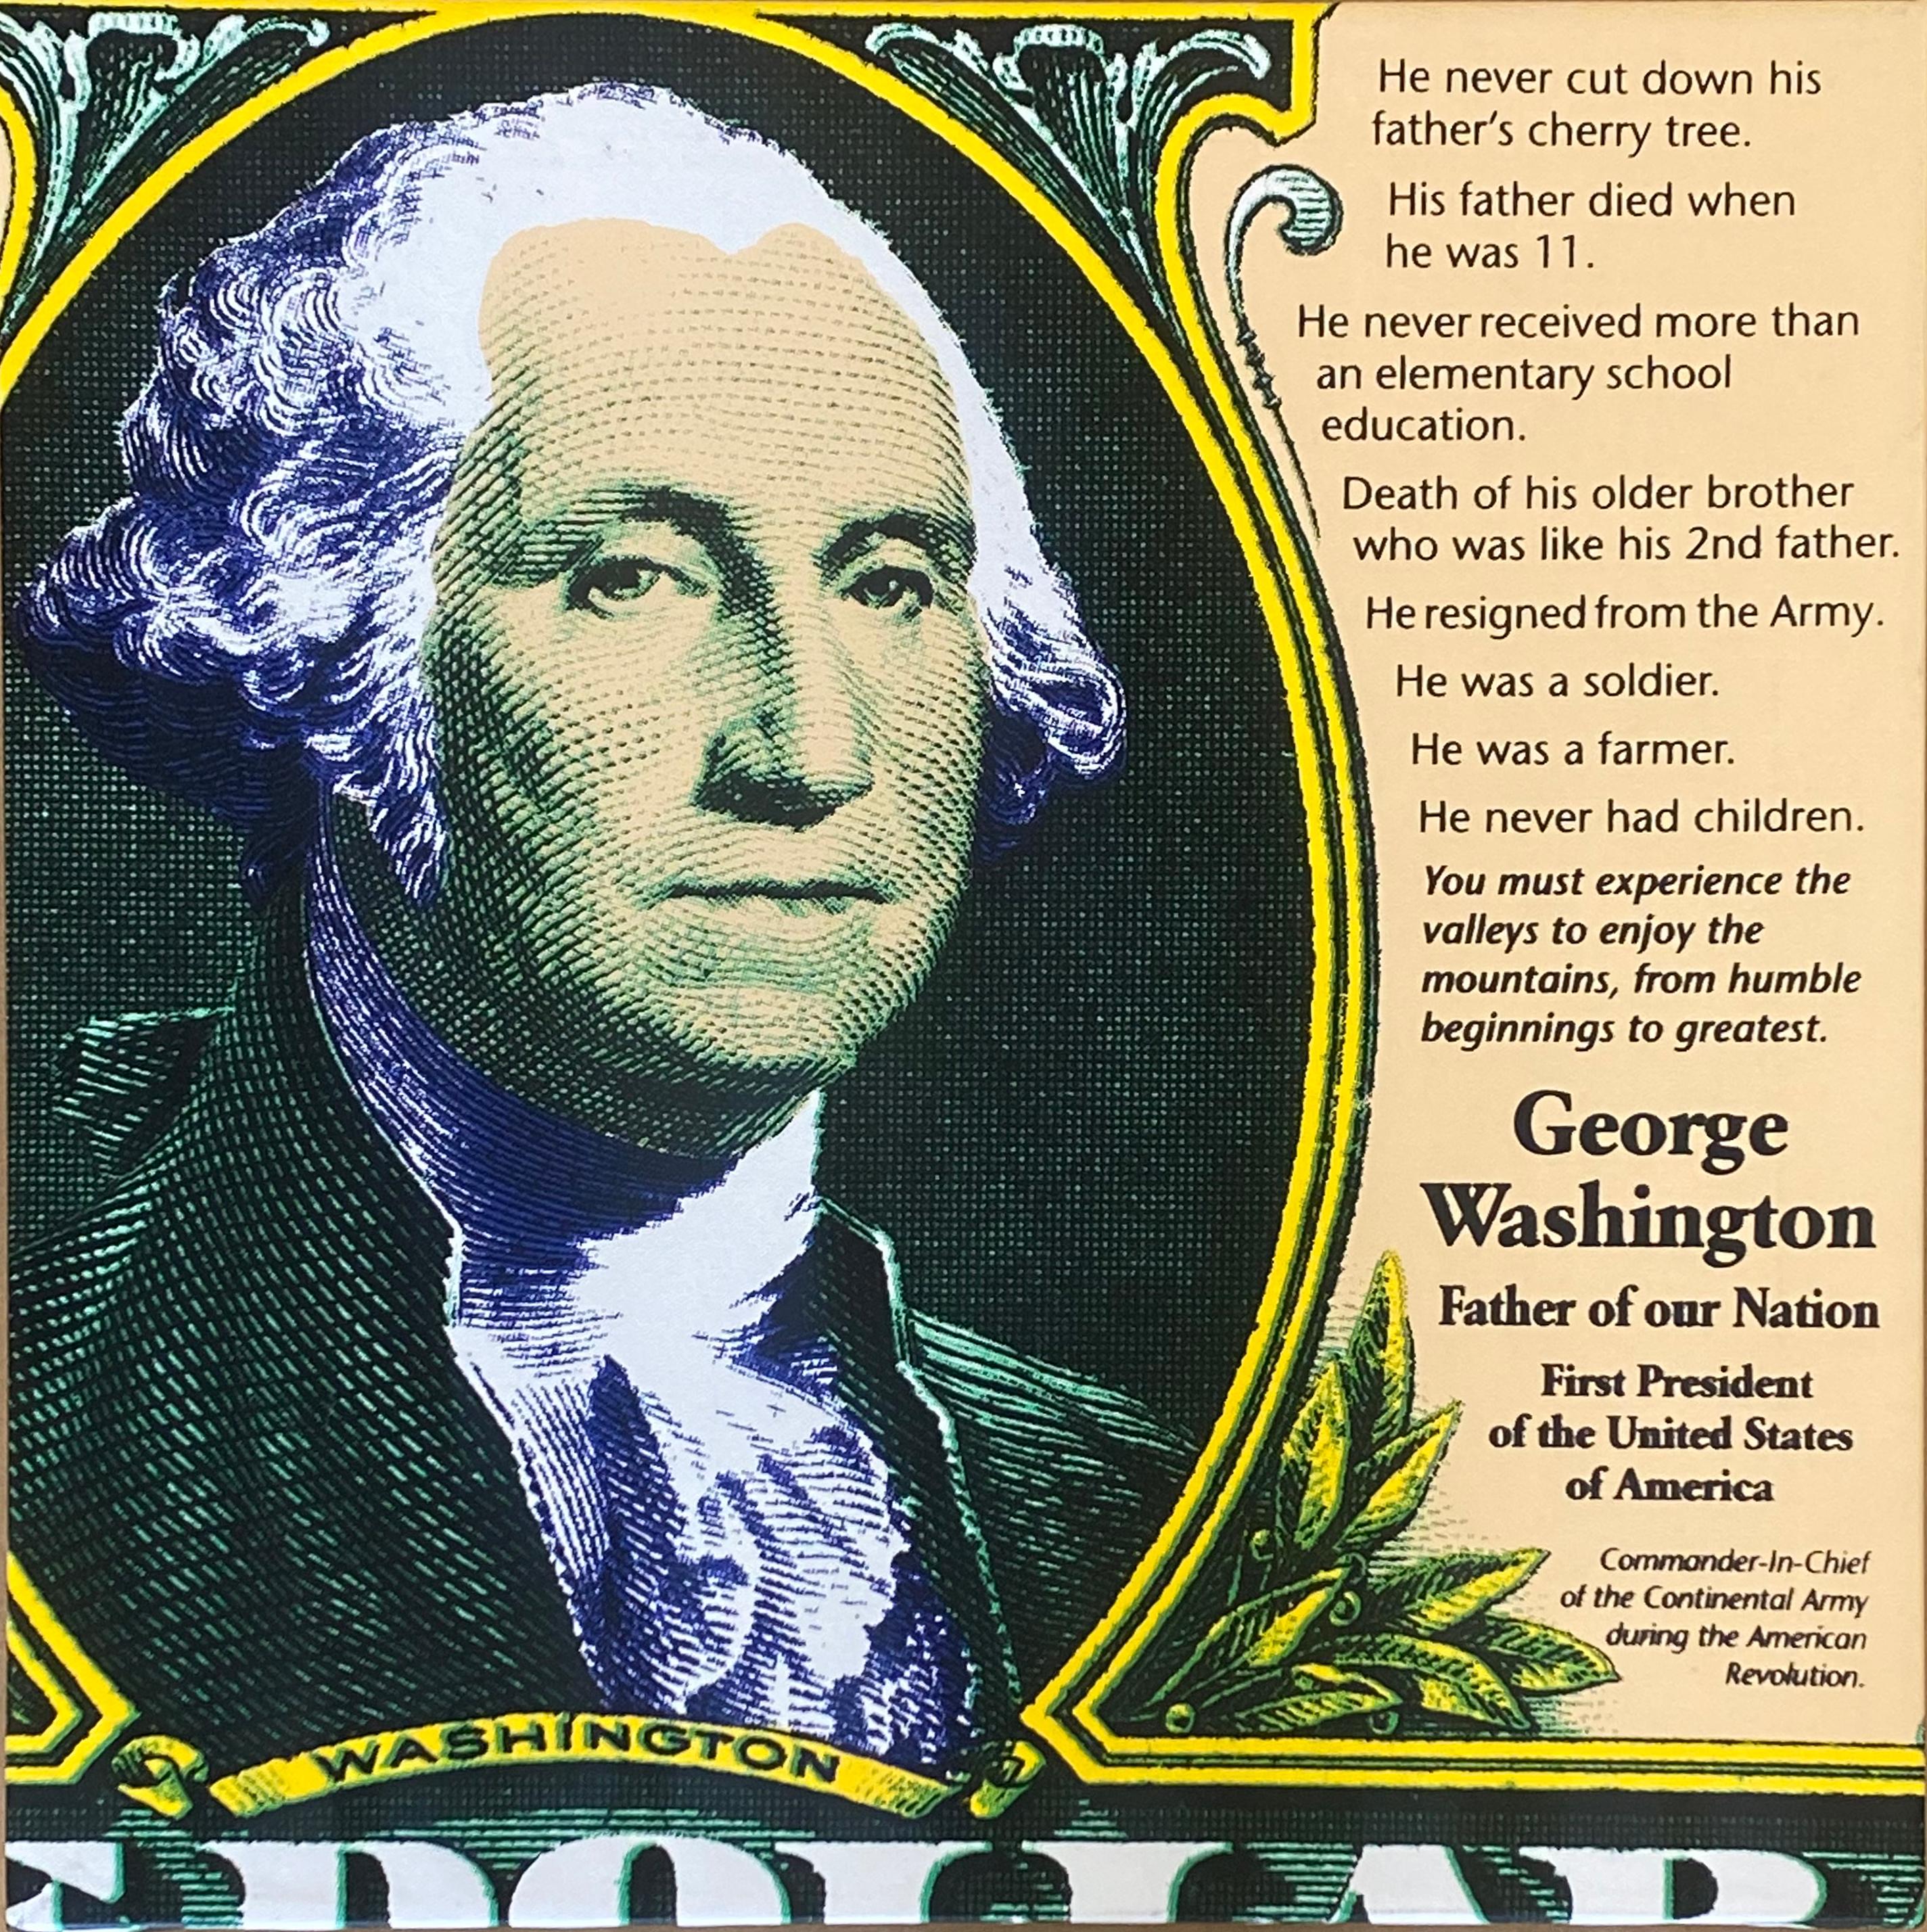 George Washington: Father of Our Nation